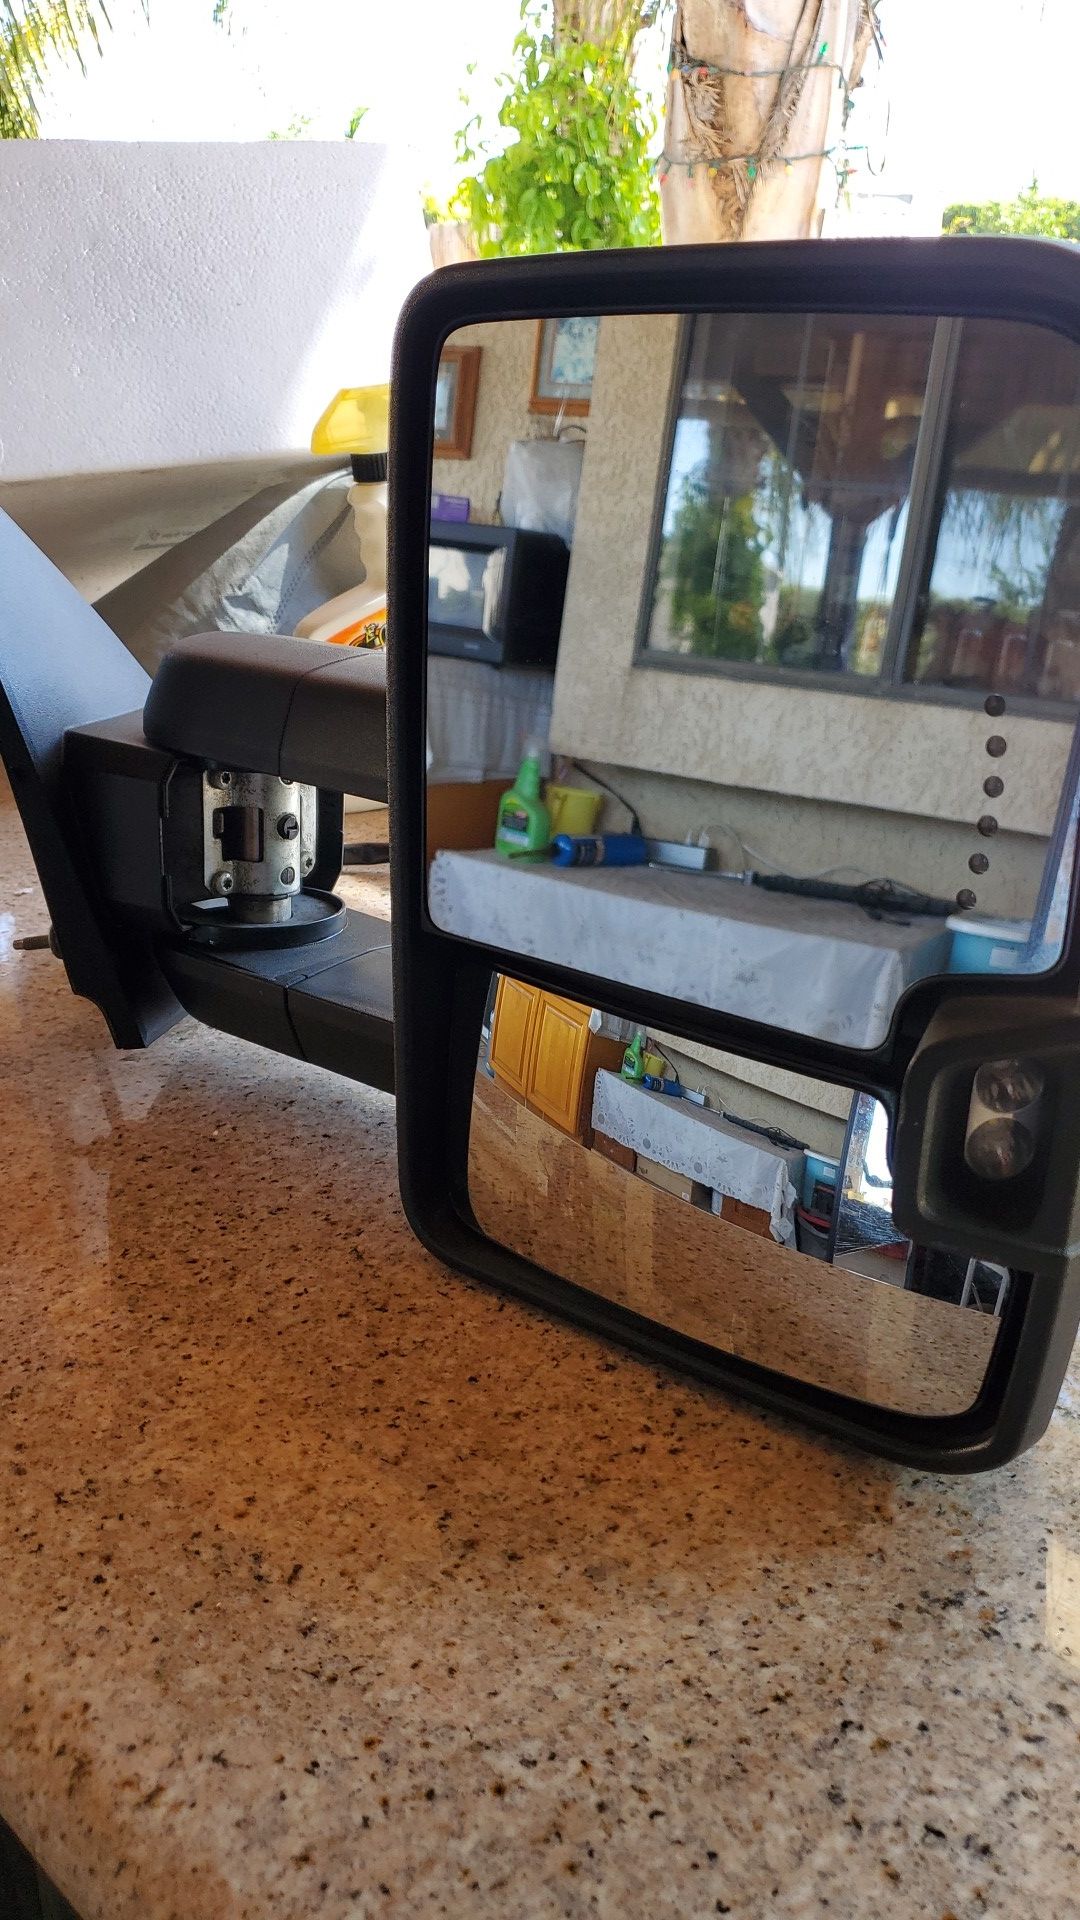 Chevy Silverado towing mirrors 2014 to 2018 passager mirror good for parts